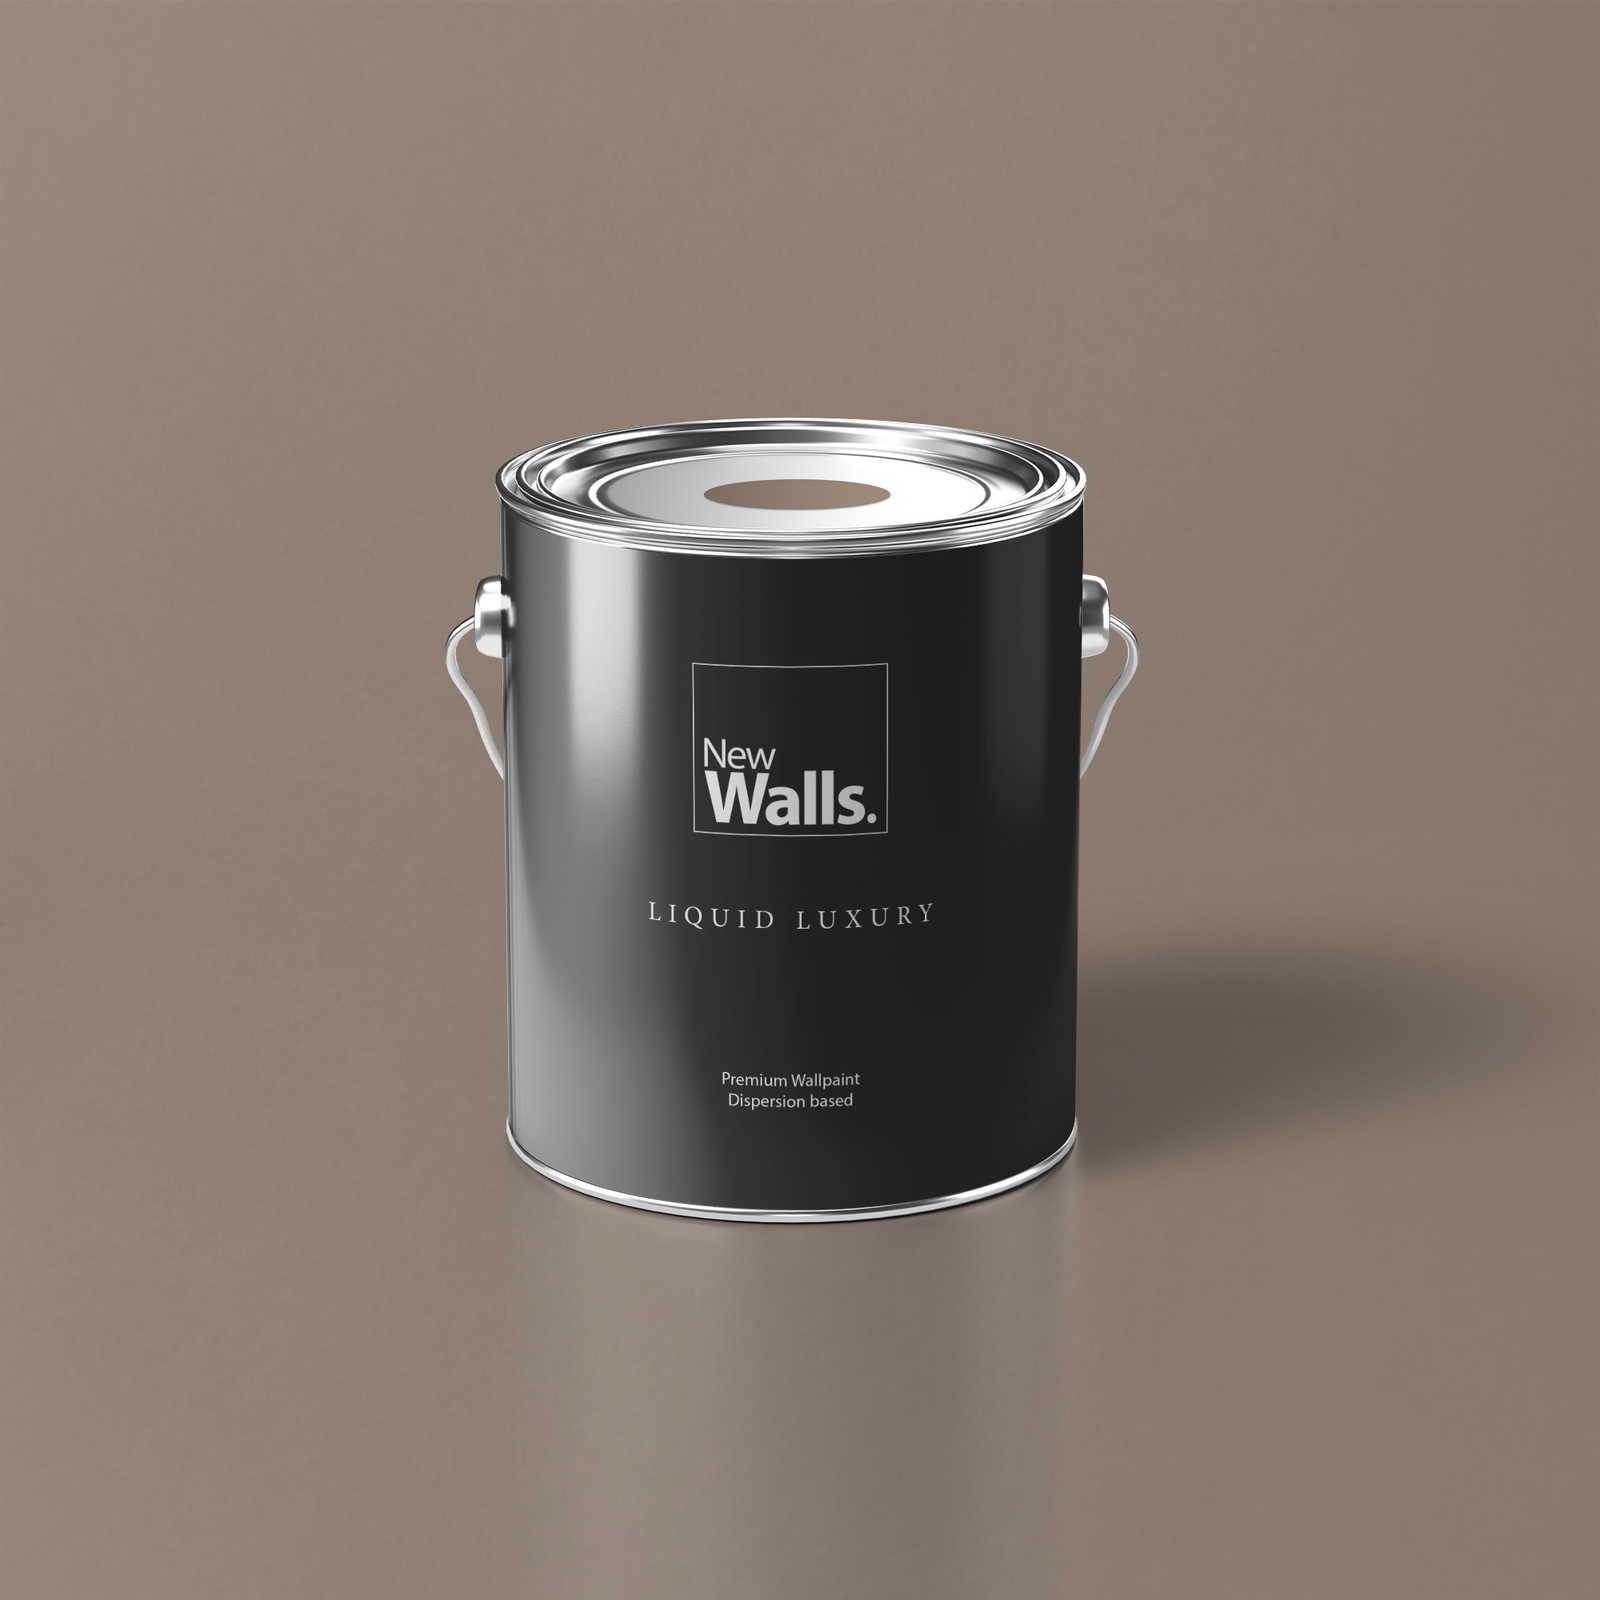 Premium Wall Paint Down-to-earth Taupe »Talented calm taupe« NW702 – 5 litre
